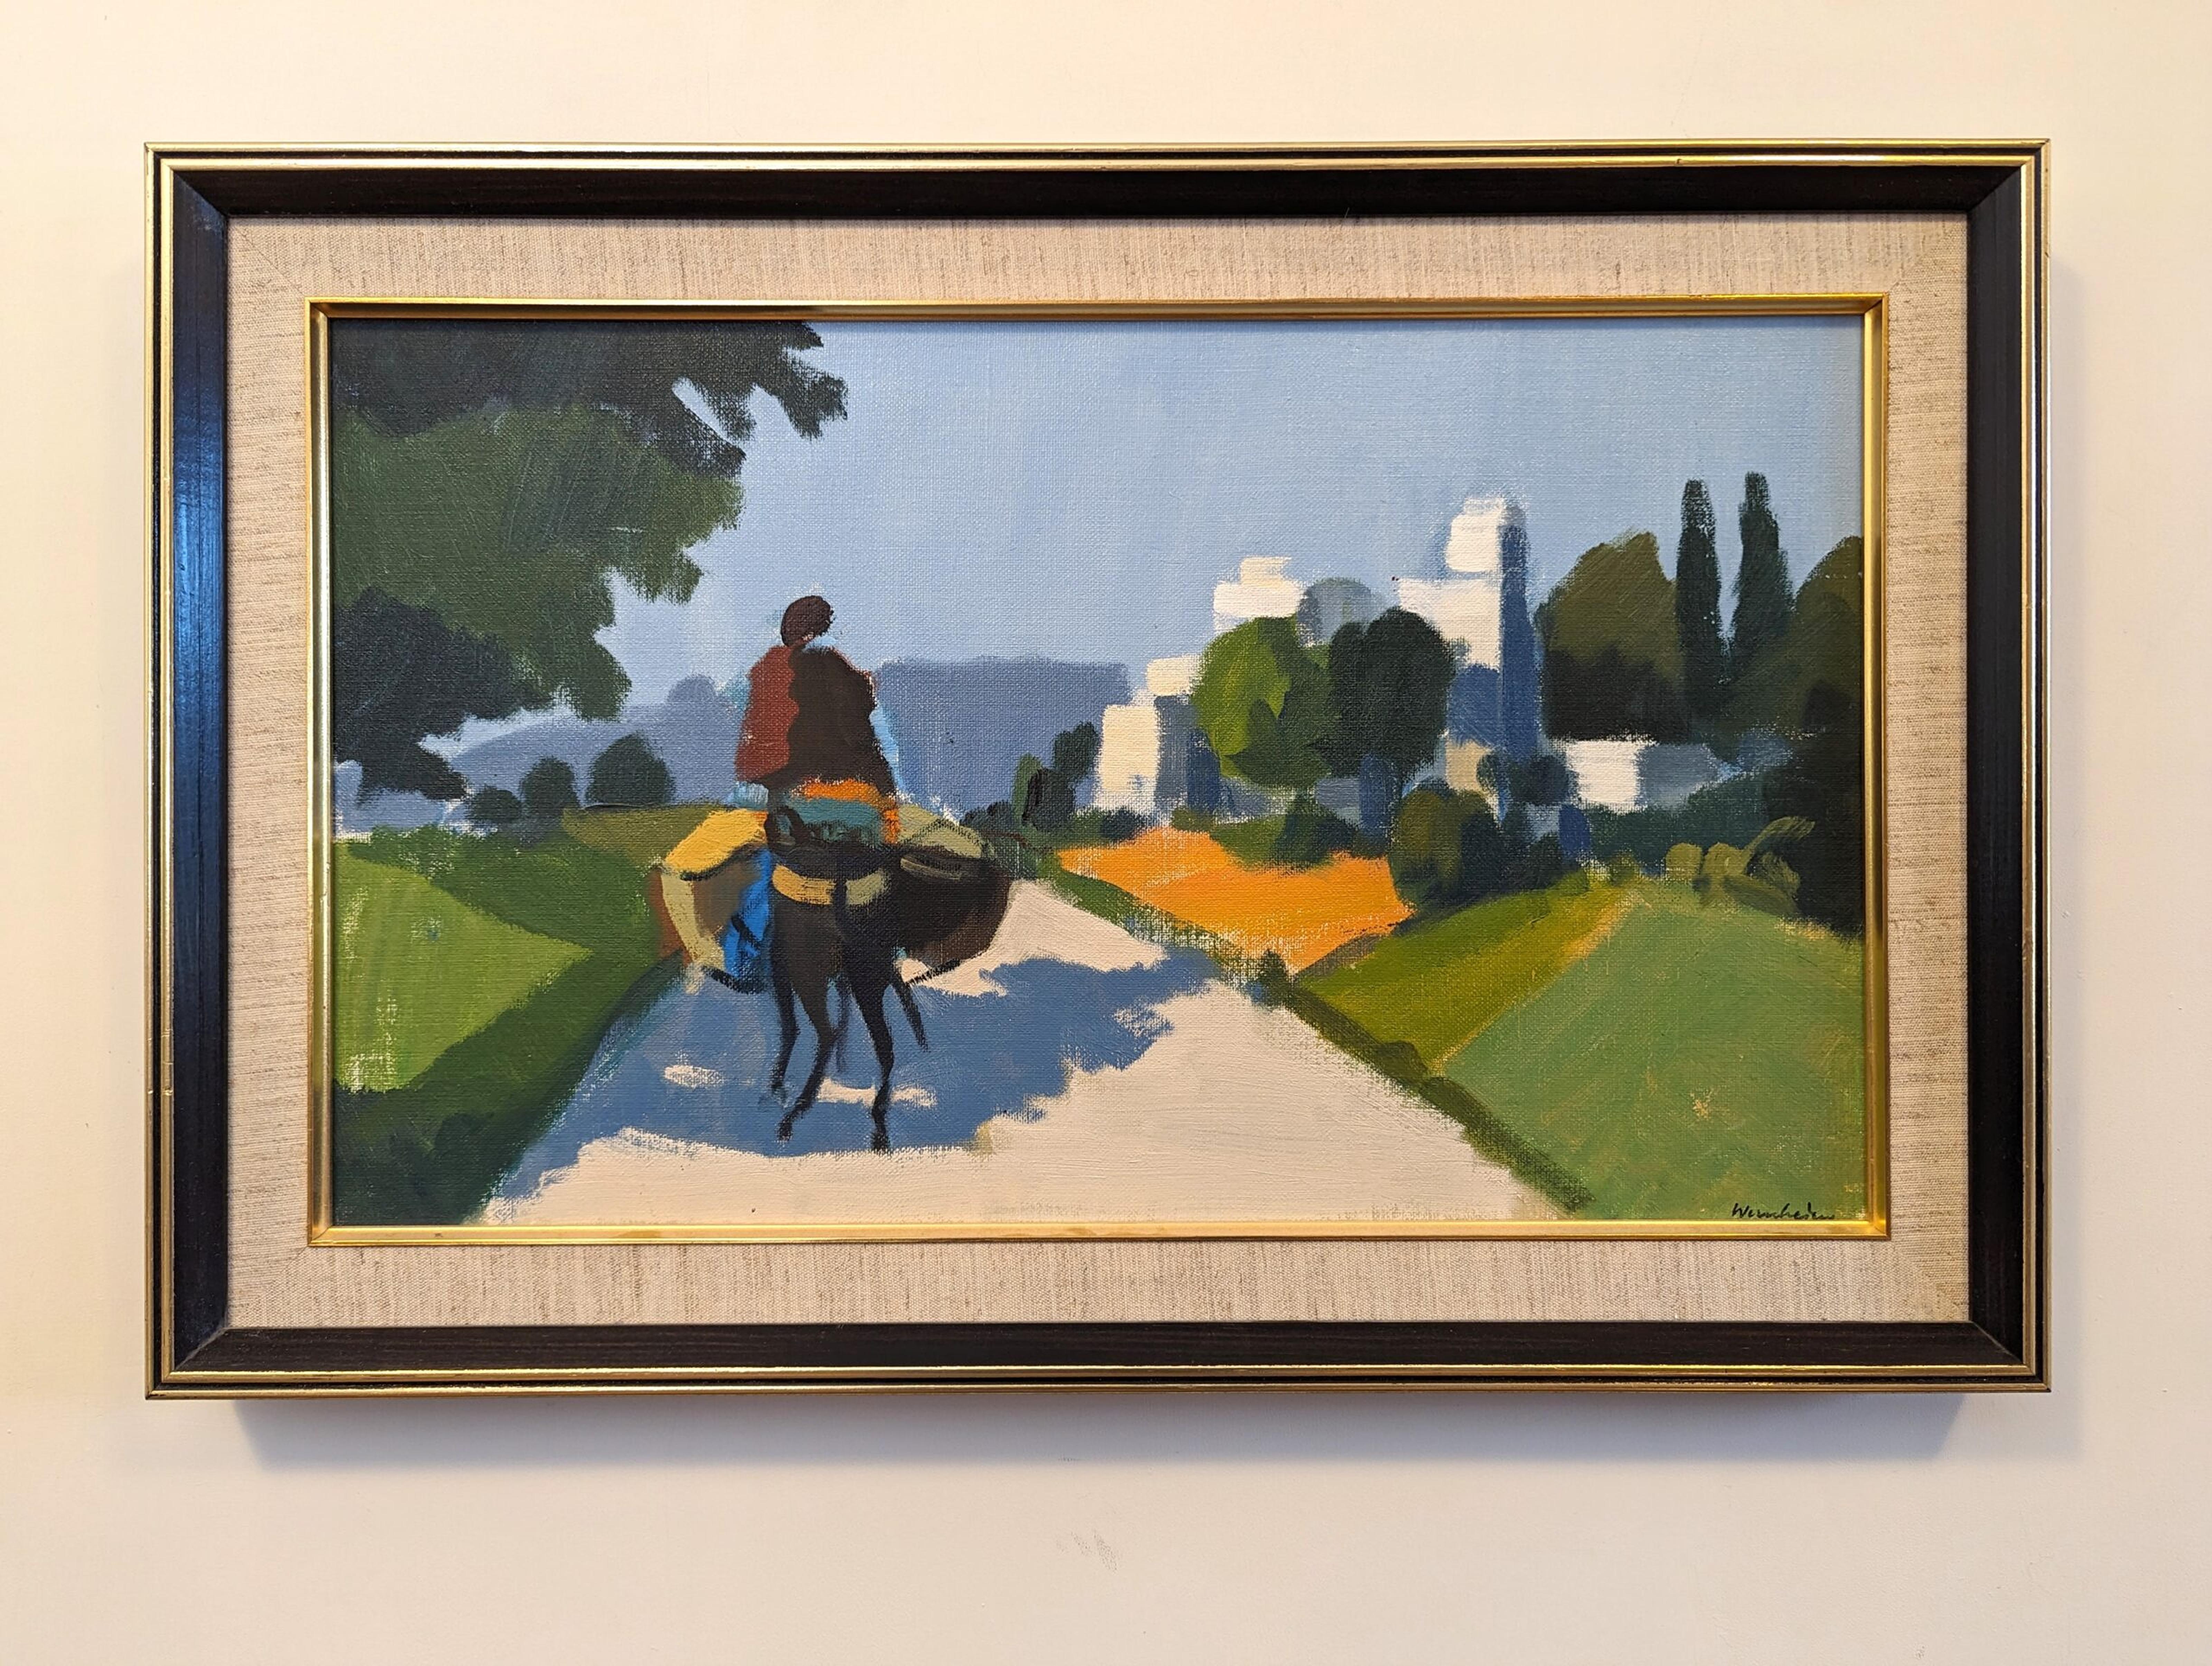 RIDER ON THE ROAD
Size: 42.5 x 64 cm (including frame)
Oil on Board

A richly coloured mid century modernist style composition, executed in oil onto canvas by the established Swedish artist Stig Wernheden (1921-1997), whose works have been